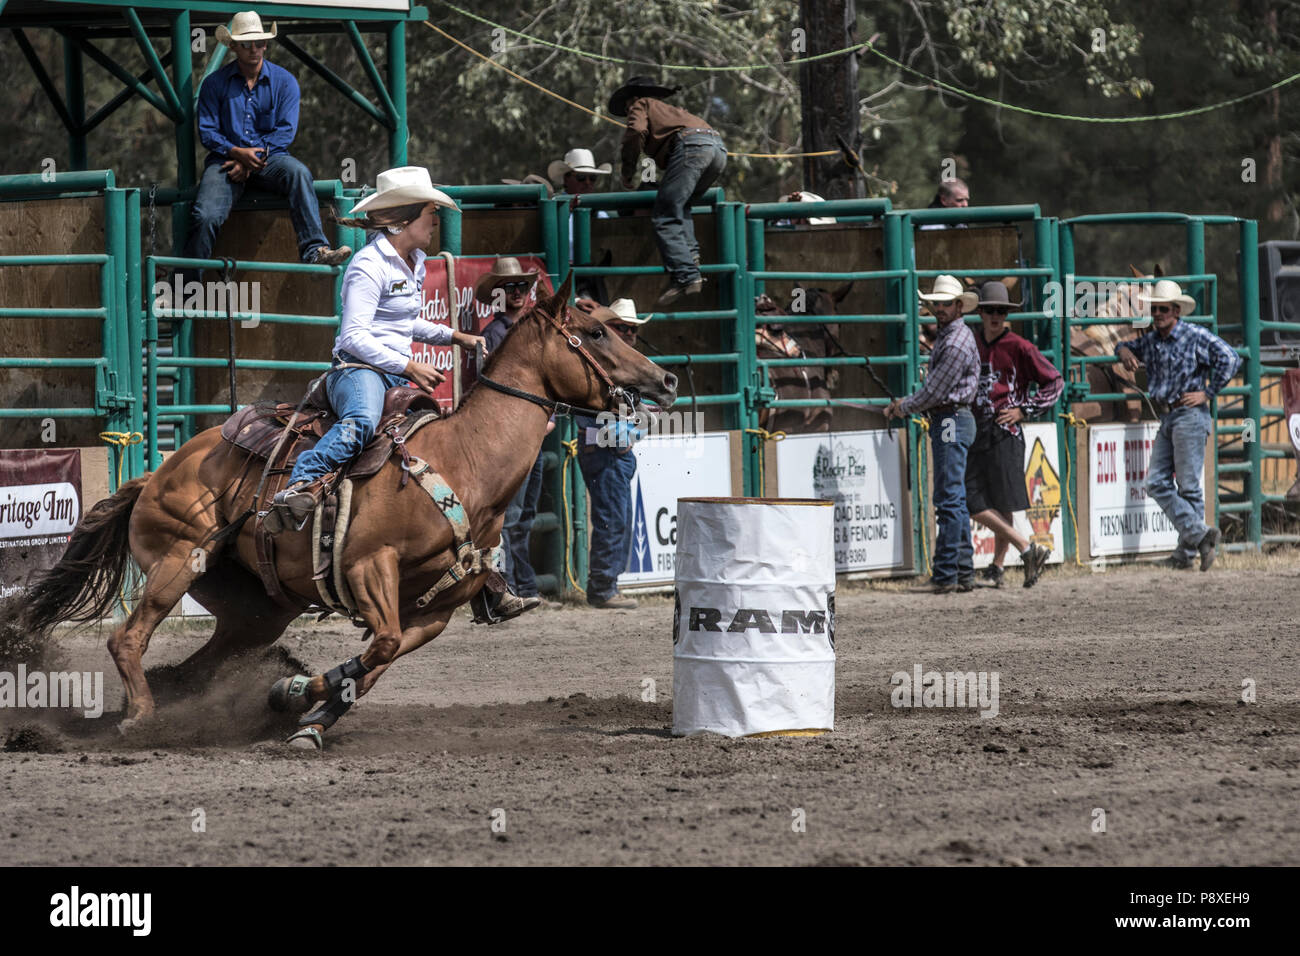 Ladies Barrel Racing excitng and fast moving horses. Tight turns, full out speed, beautiful  cowgirls competing. Cranbrook Pro Rodeo Stock Photo